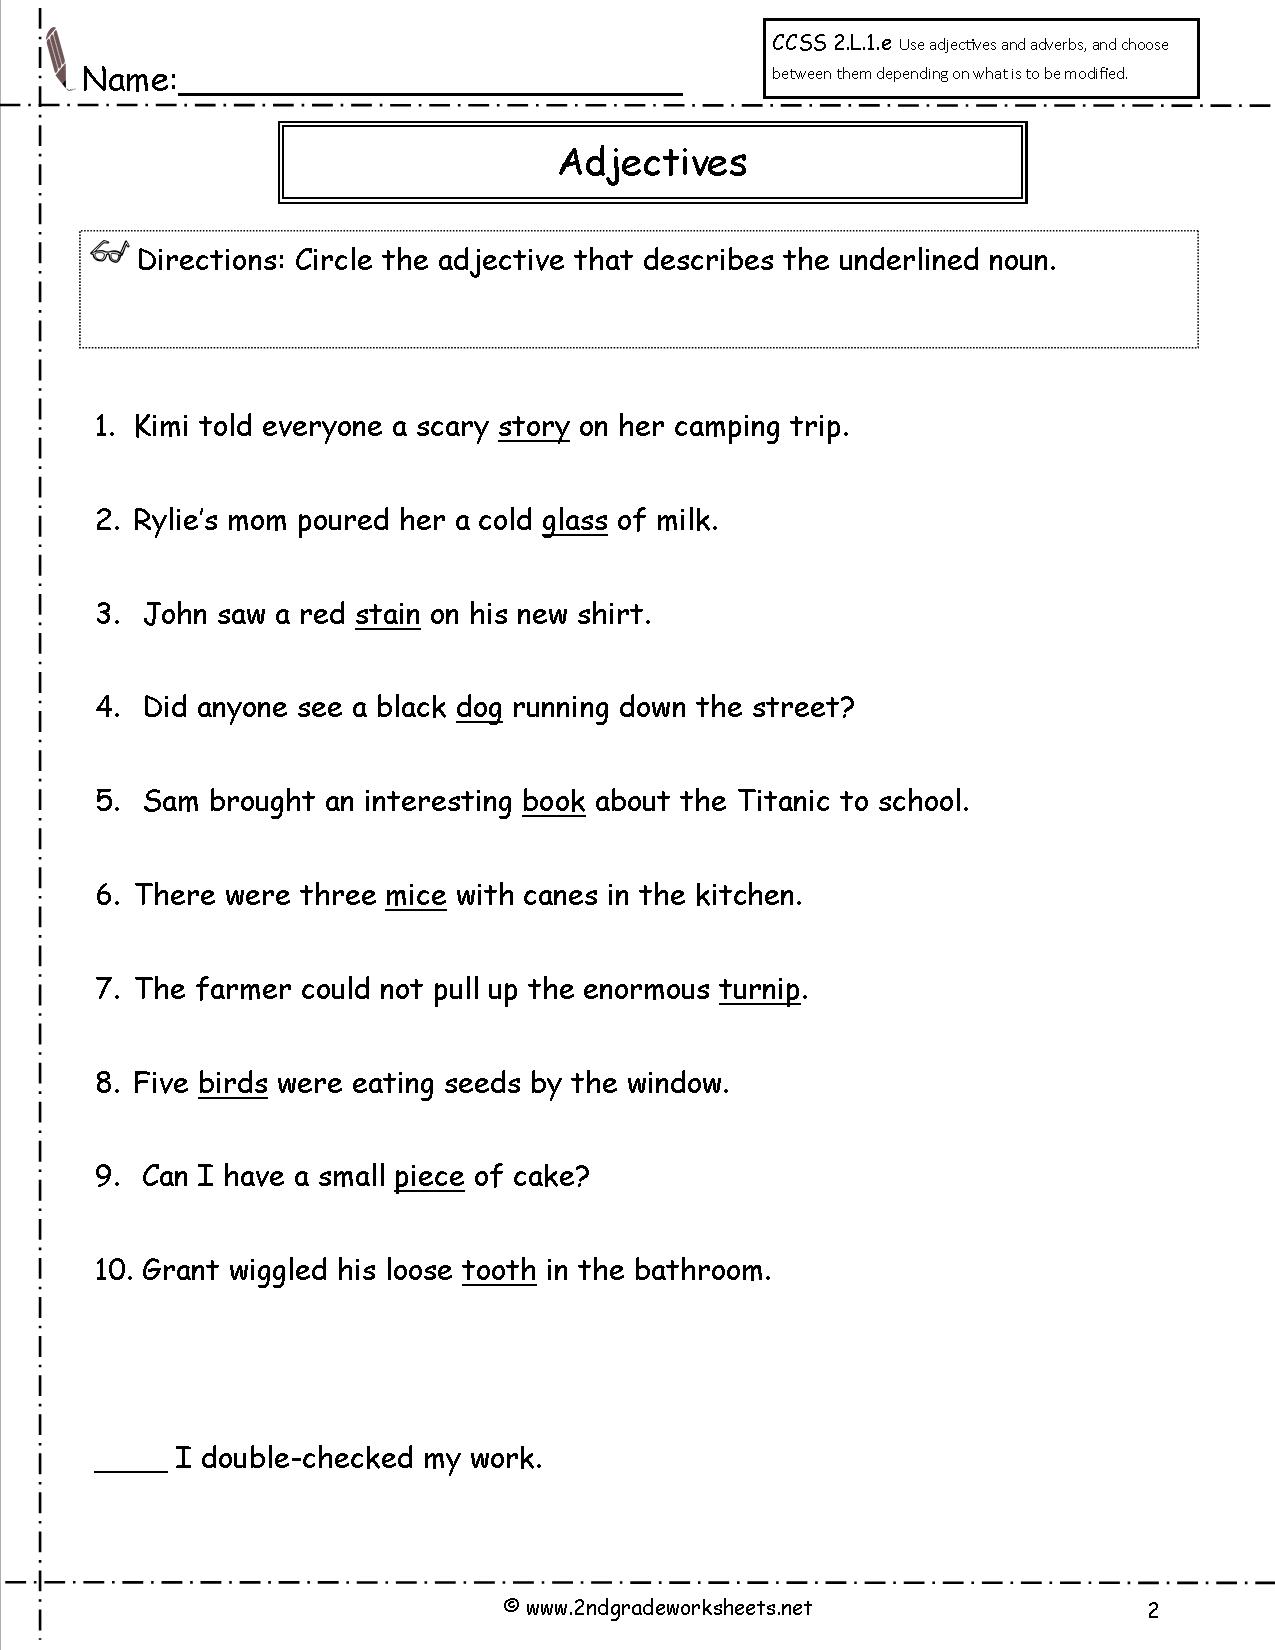 Free Using Adjectives Worksheets